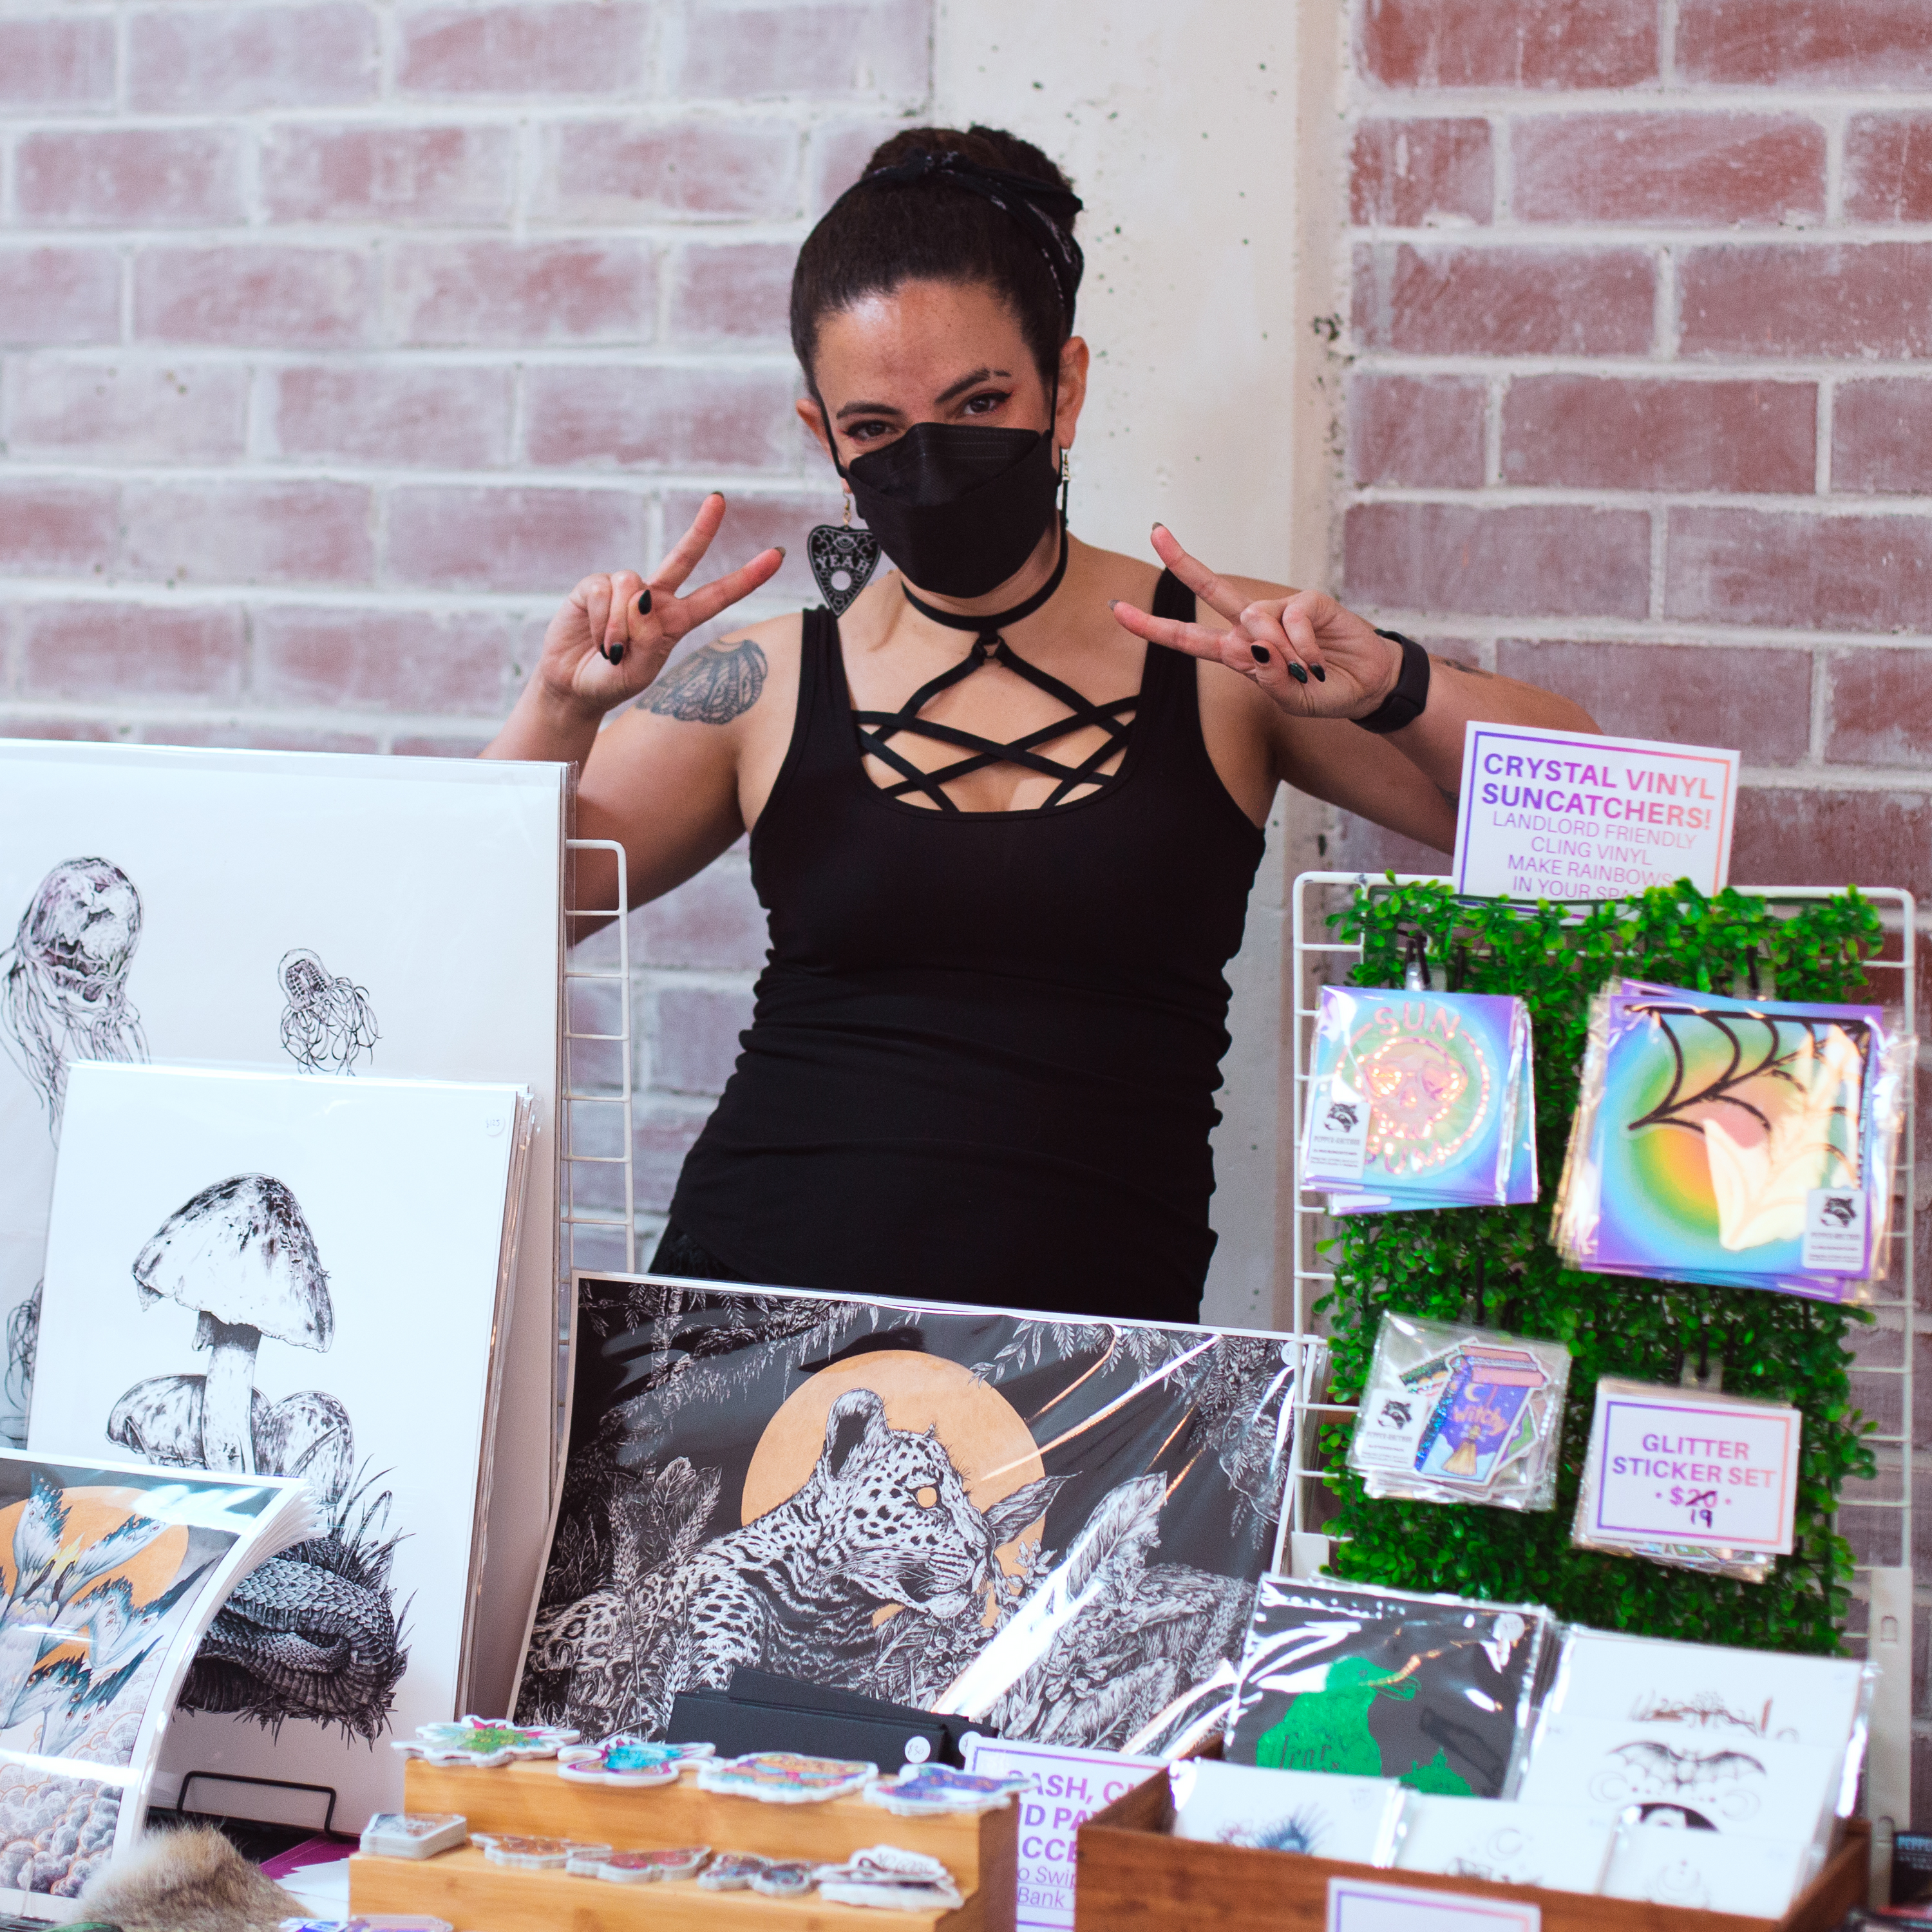 The artist Pepper Raccoon, wearing a face mask and posing behind her artist stall.